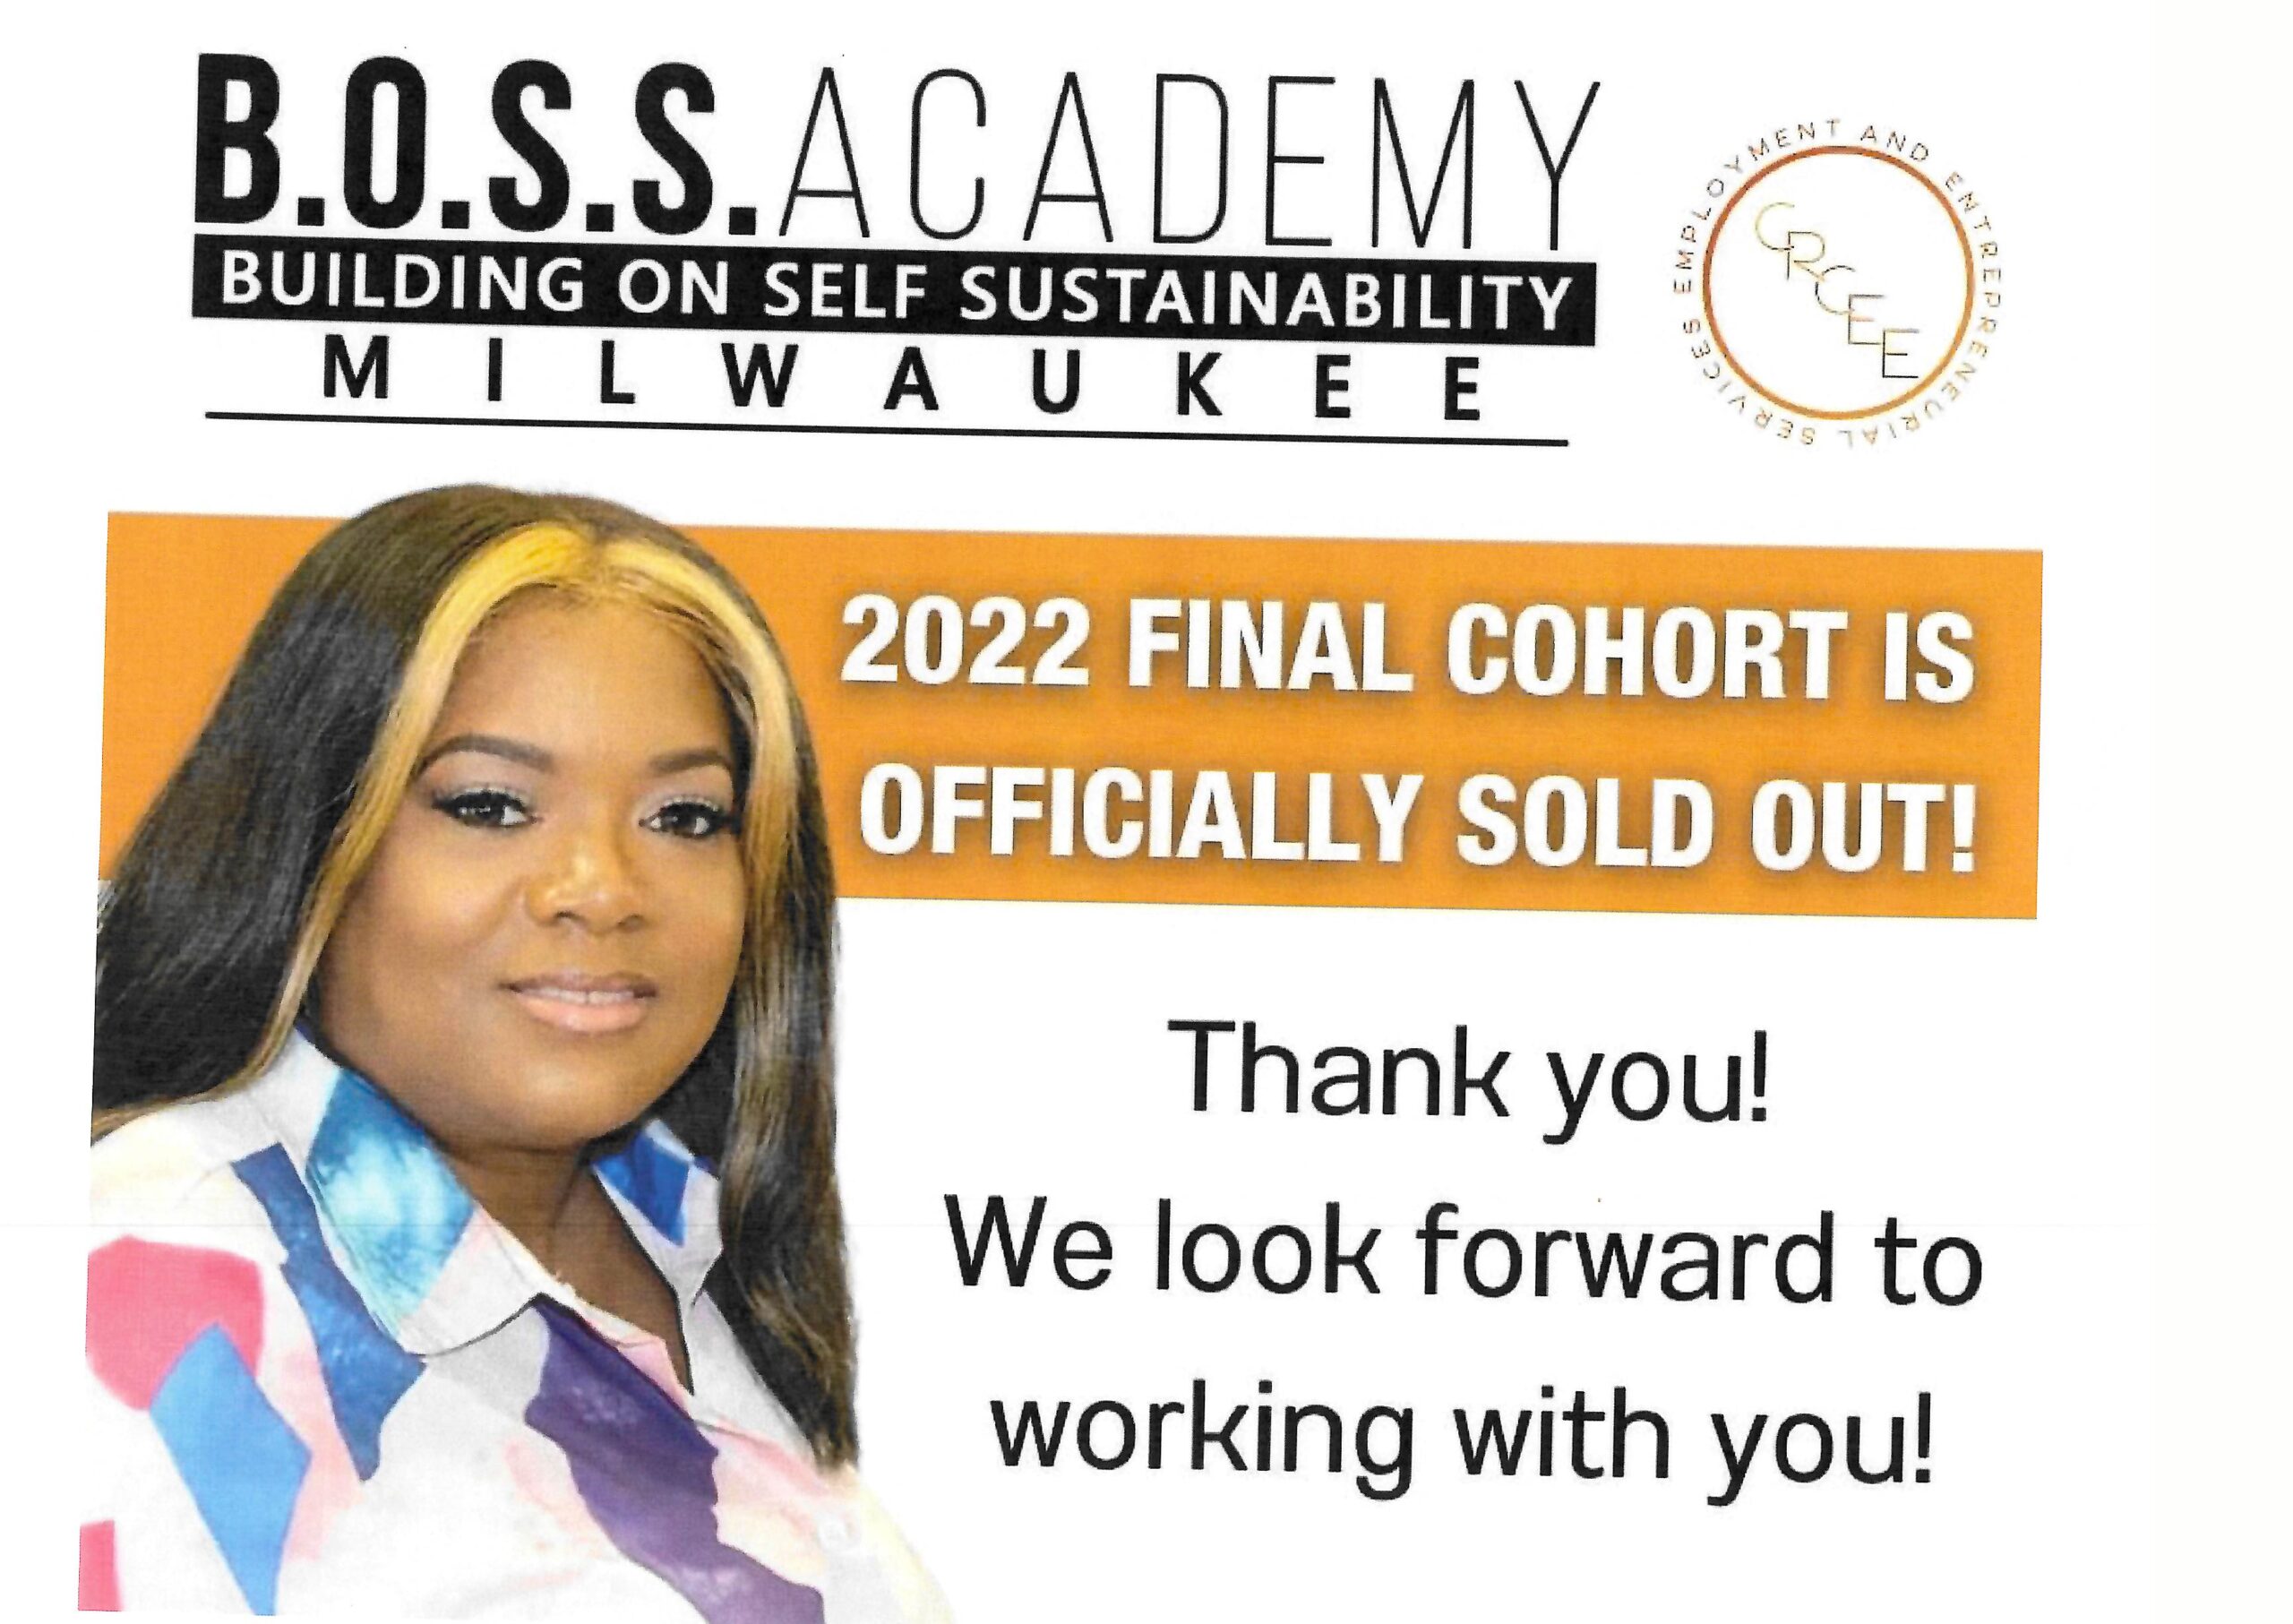 A flyer for Cynthia Brown's B.O.S.S. Academy advertises a business training.